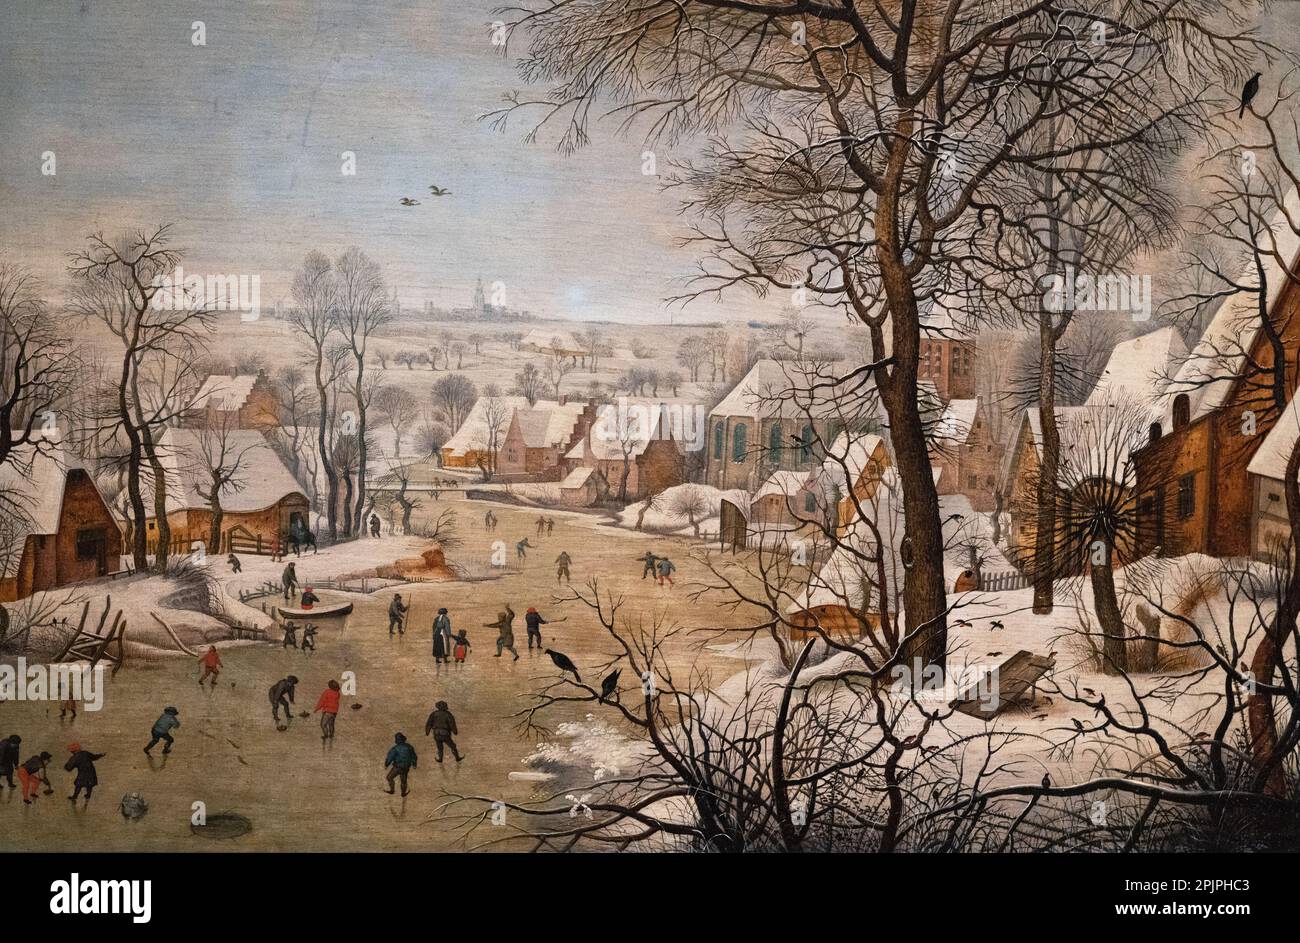 Pieter Brueghel the Younger painting; Winter Landscape with Birdtrap 1626; Flemish painter who produced copies of his fathers' works as here. Stock Photo